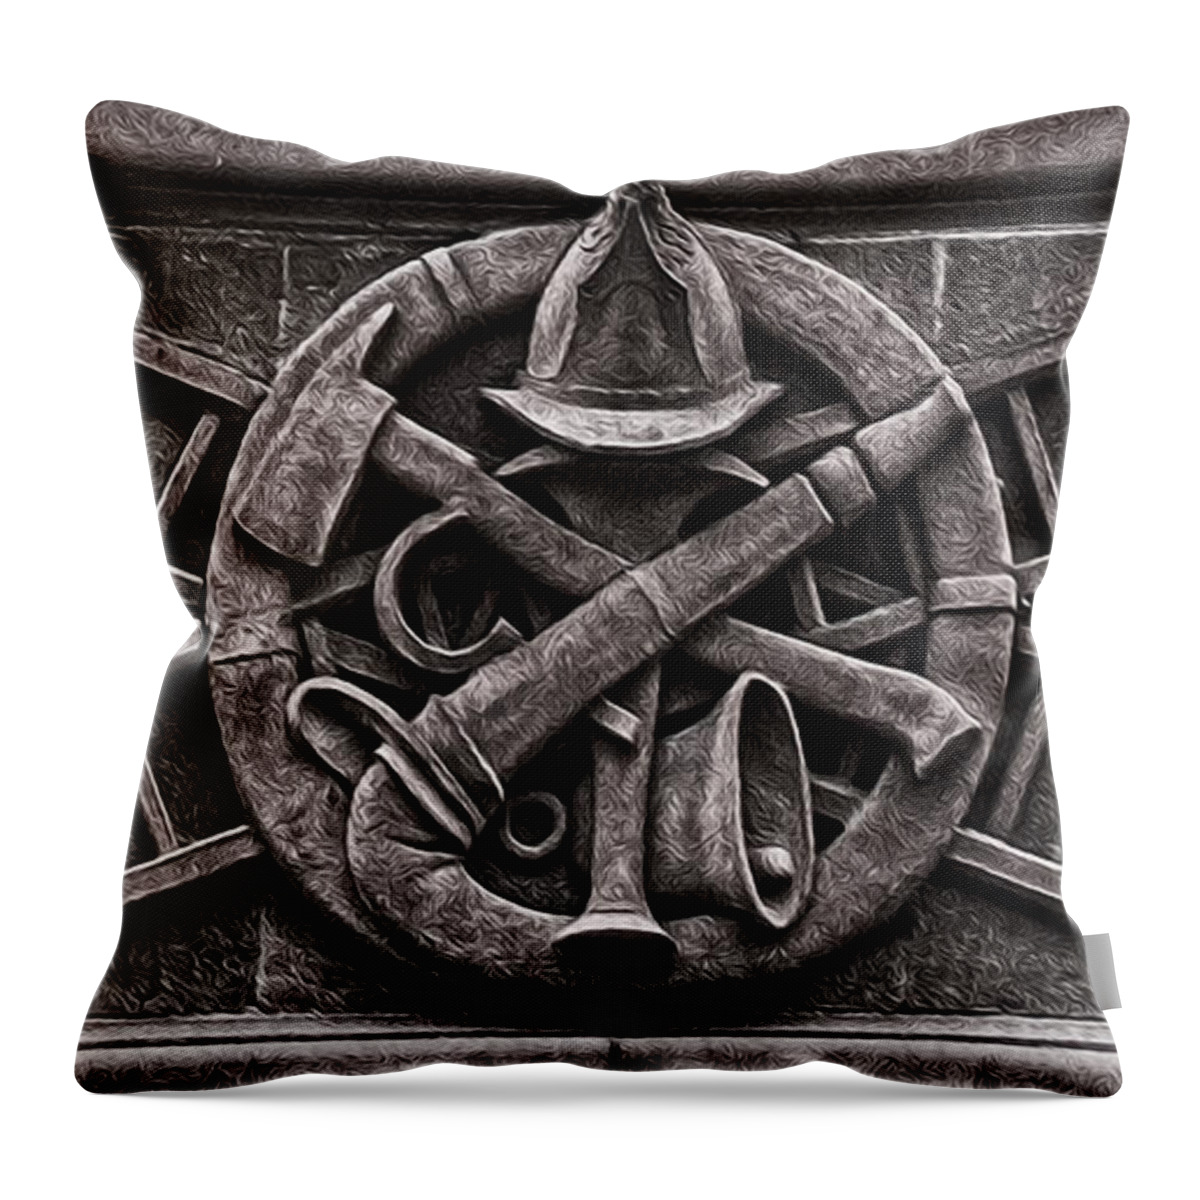 Fire Throw Pillow featuring the photograph Firefighter Symbols by Phil Cardamone